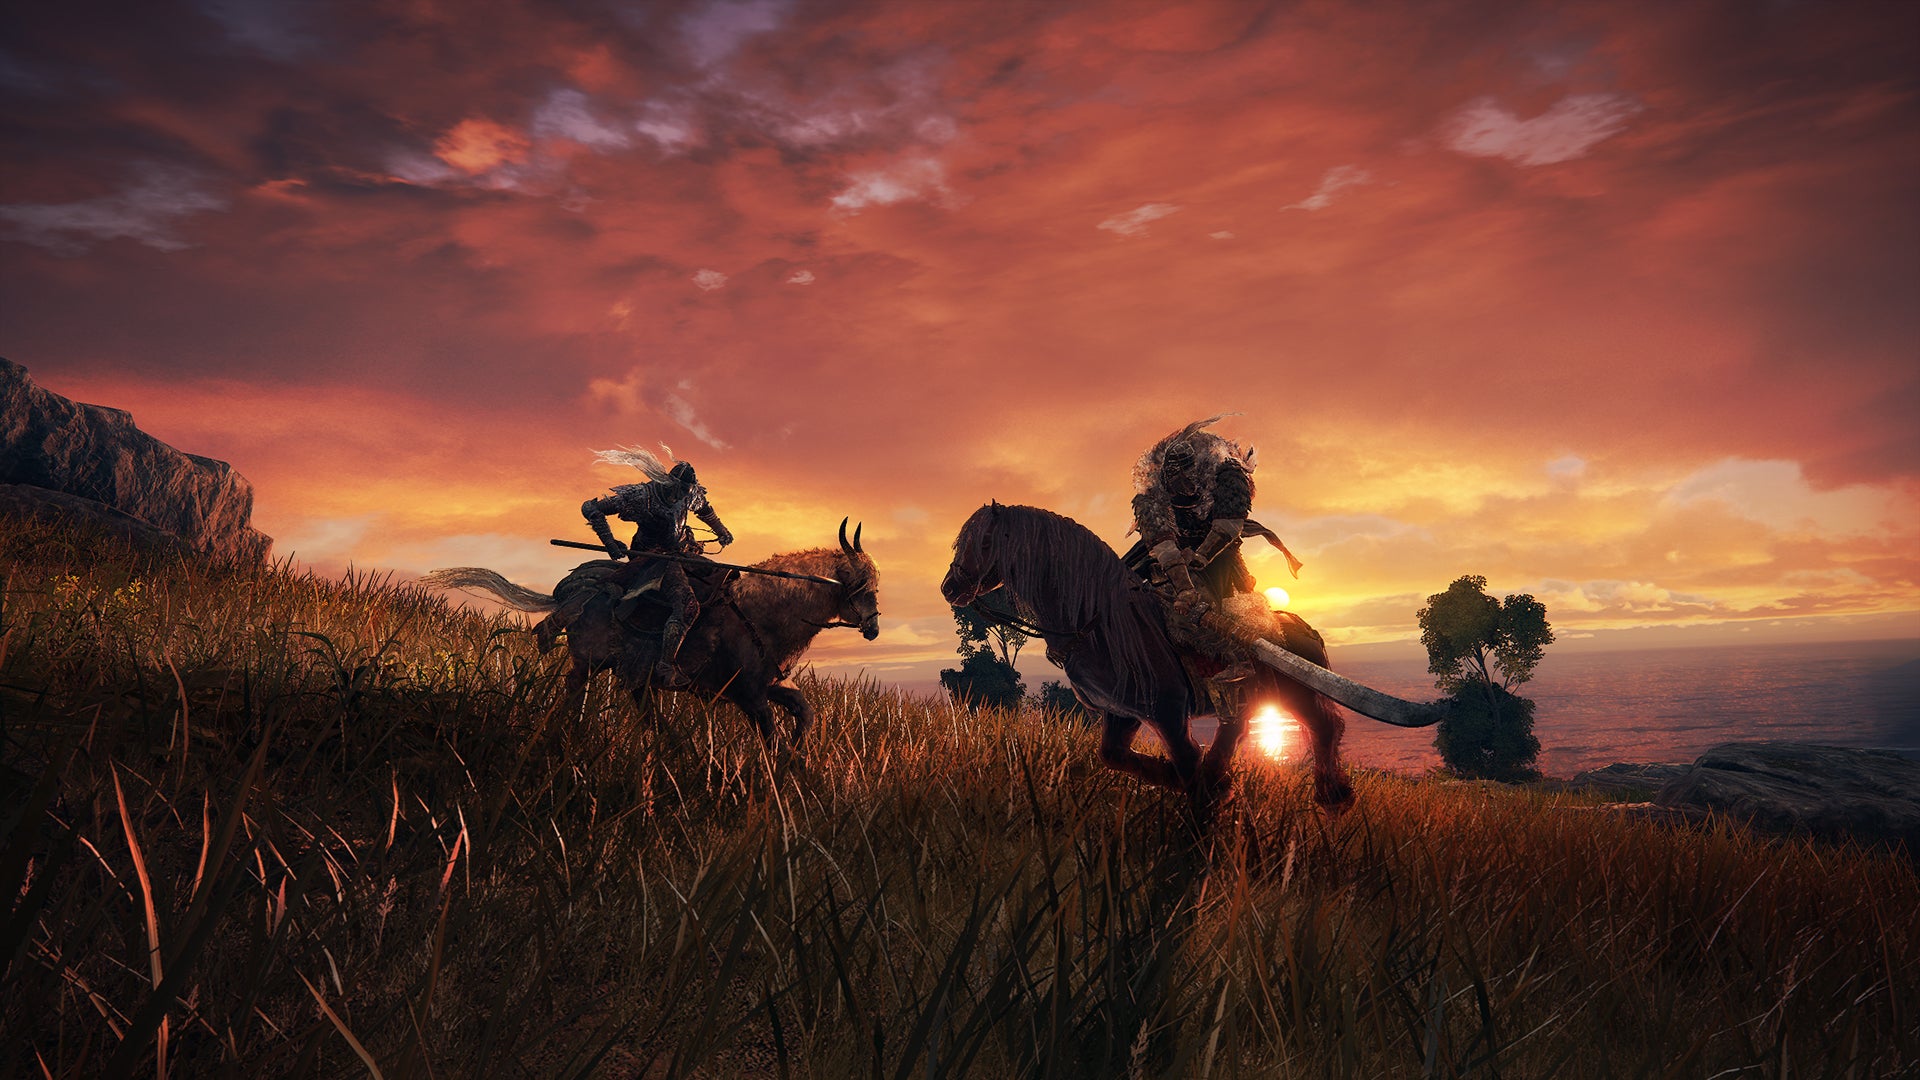 Two warriors on horseback charge towards each other with weapons ready in an Elden Ring screenshot.